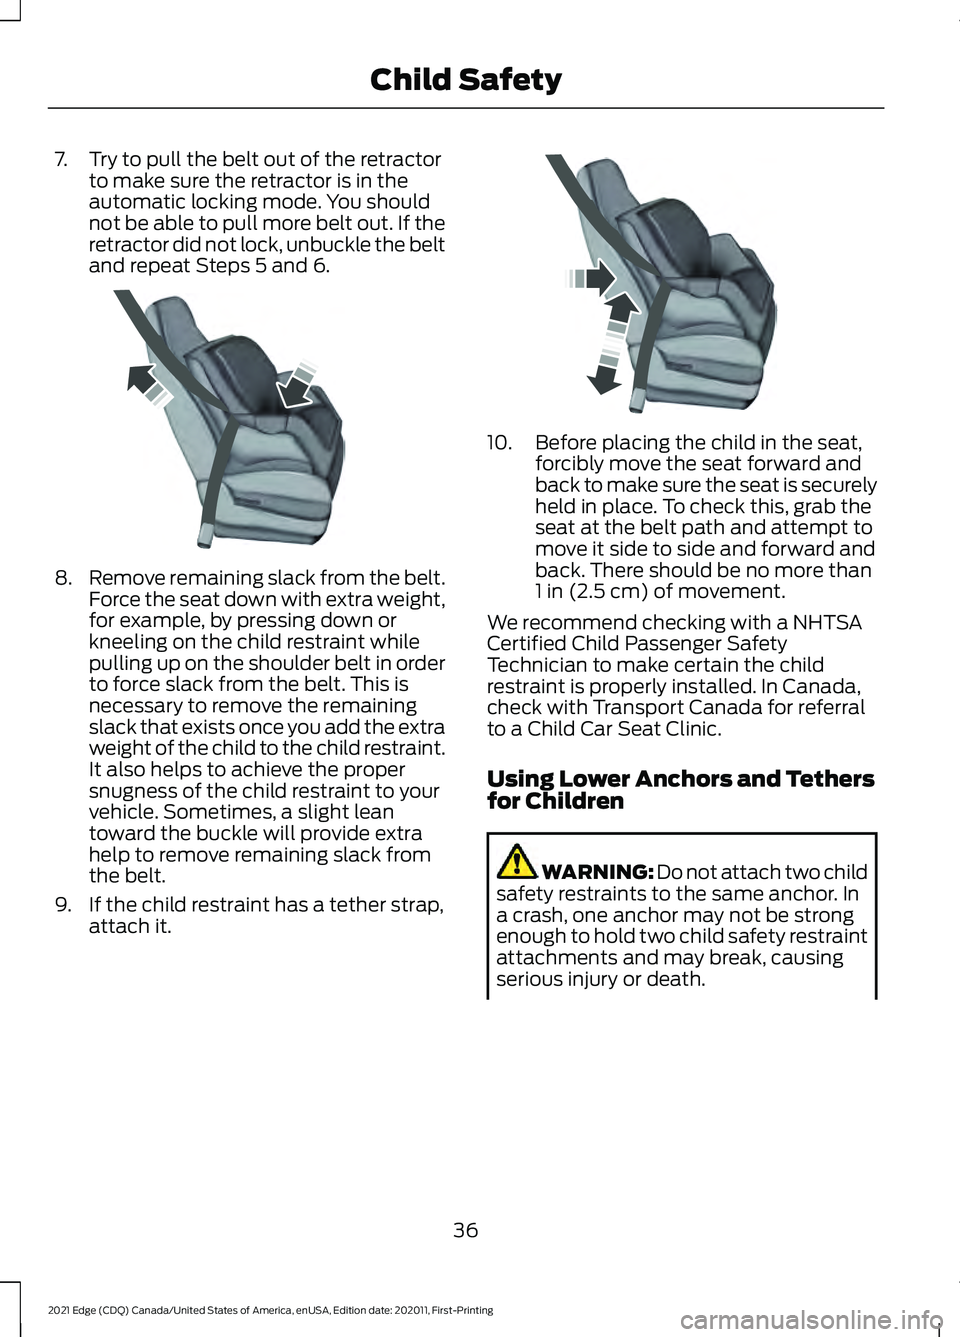 FORD EDGE 2021  Owners Manual 7. Try to pull the belt out of the retractor
to make sure the retractor is in the
automatic locking mode. You should
not be able to pull more belt out. If the
retractor did not lock, unbuckle the belt